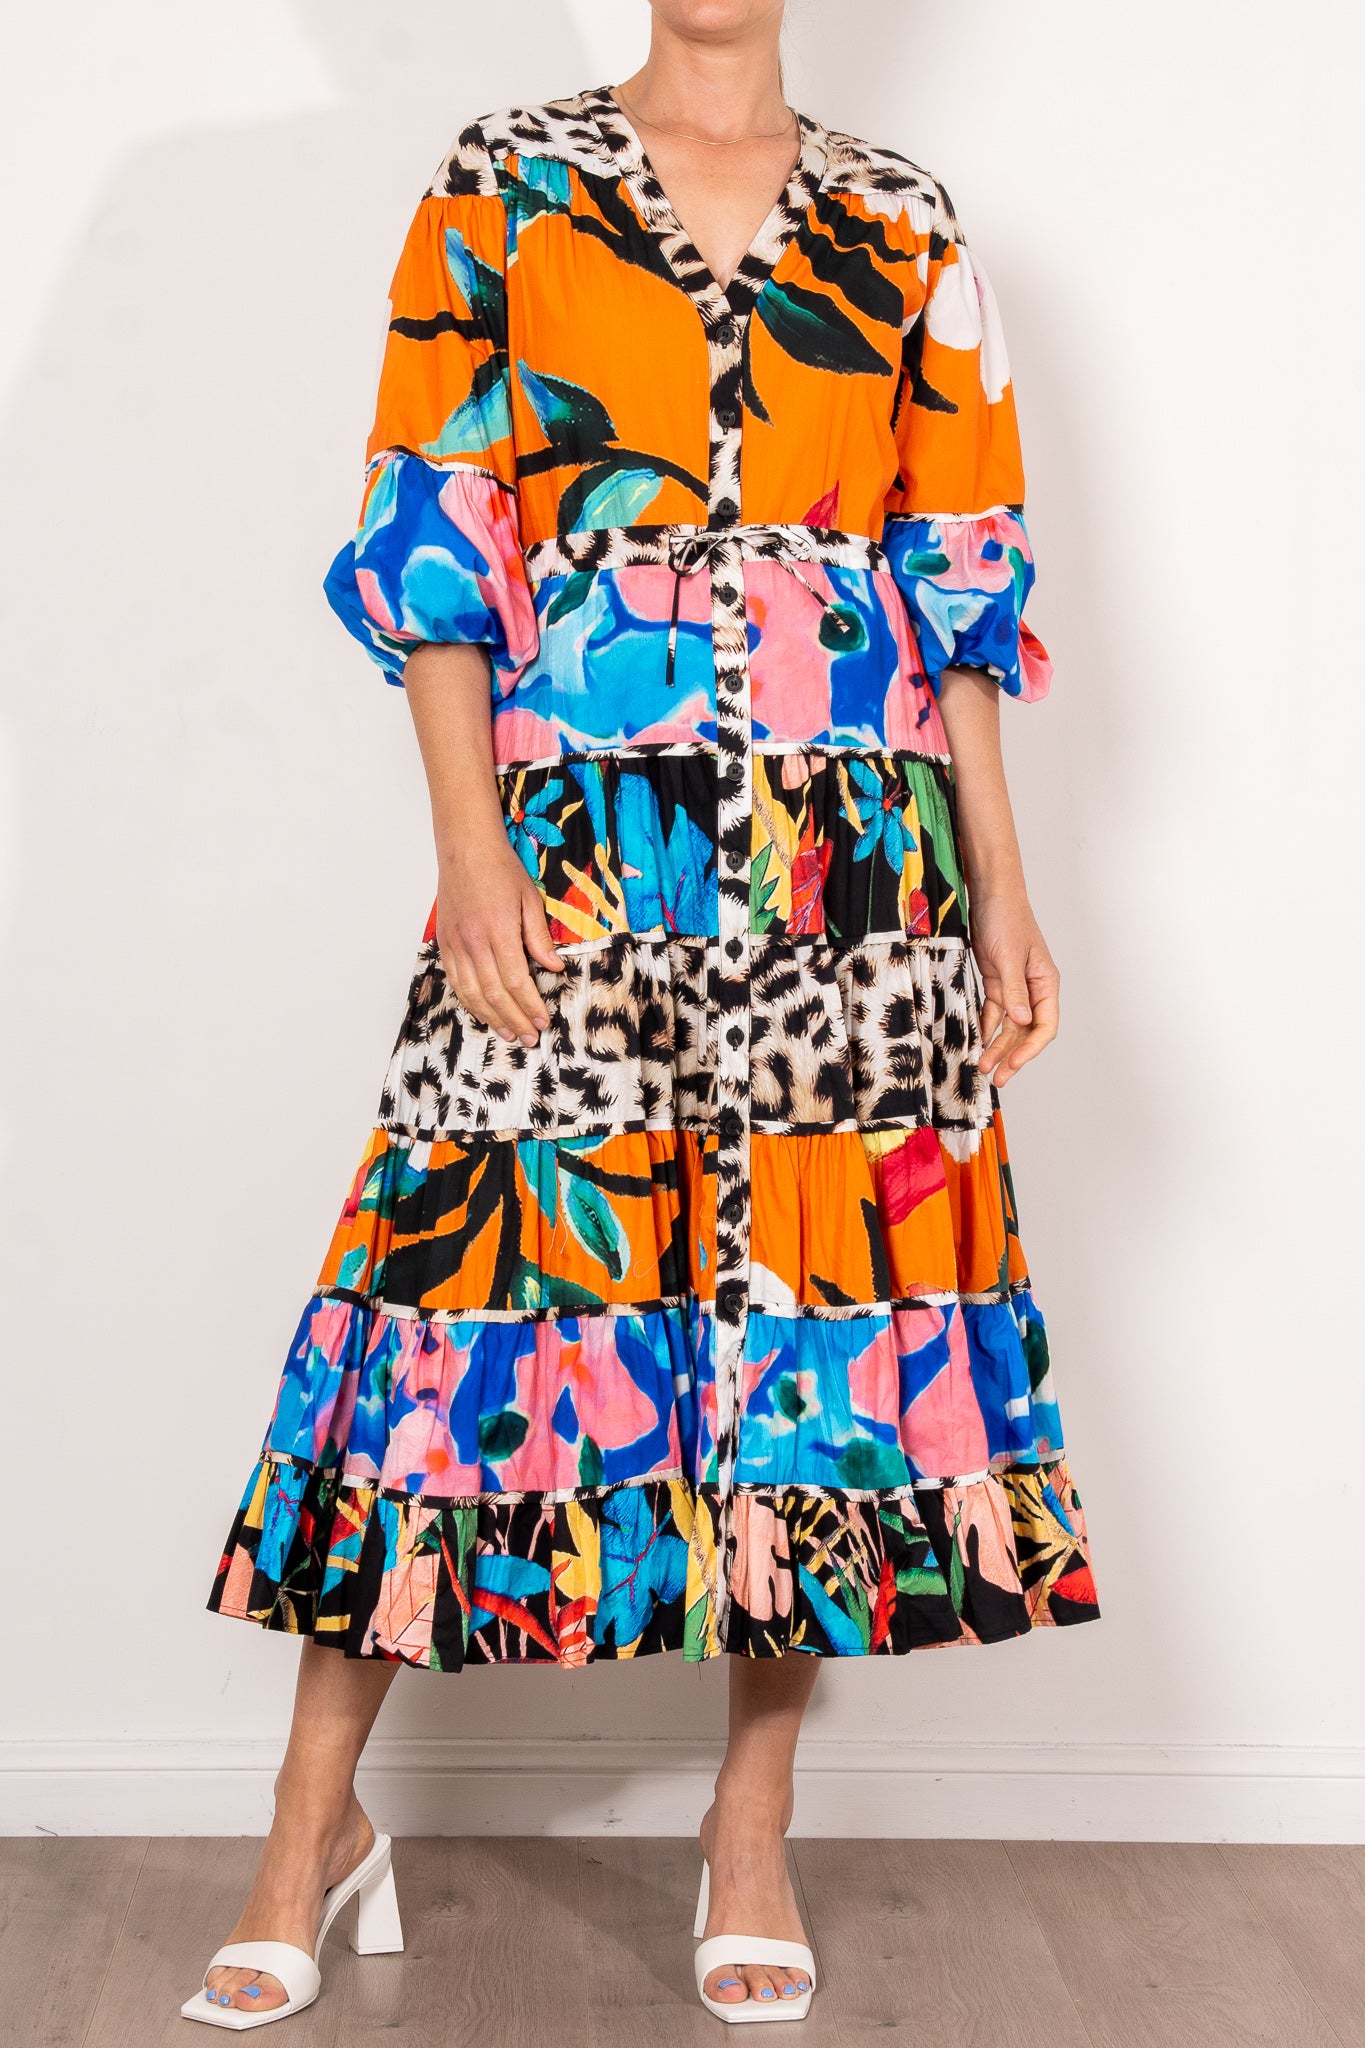 COOPER by Trelise Cooper All Together Now Dress